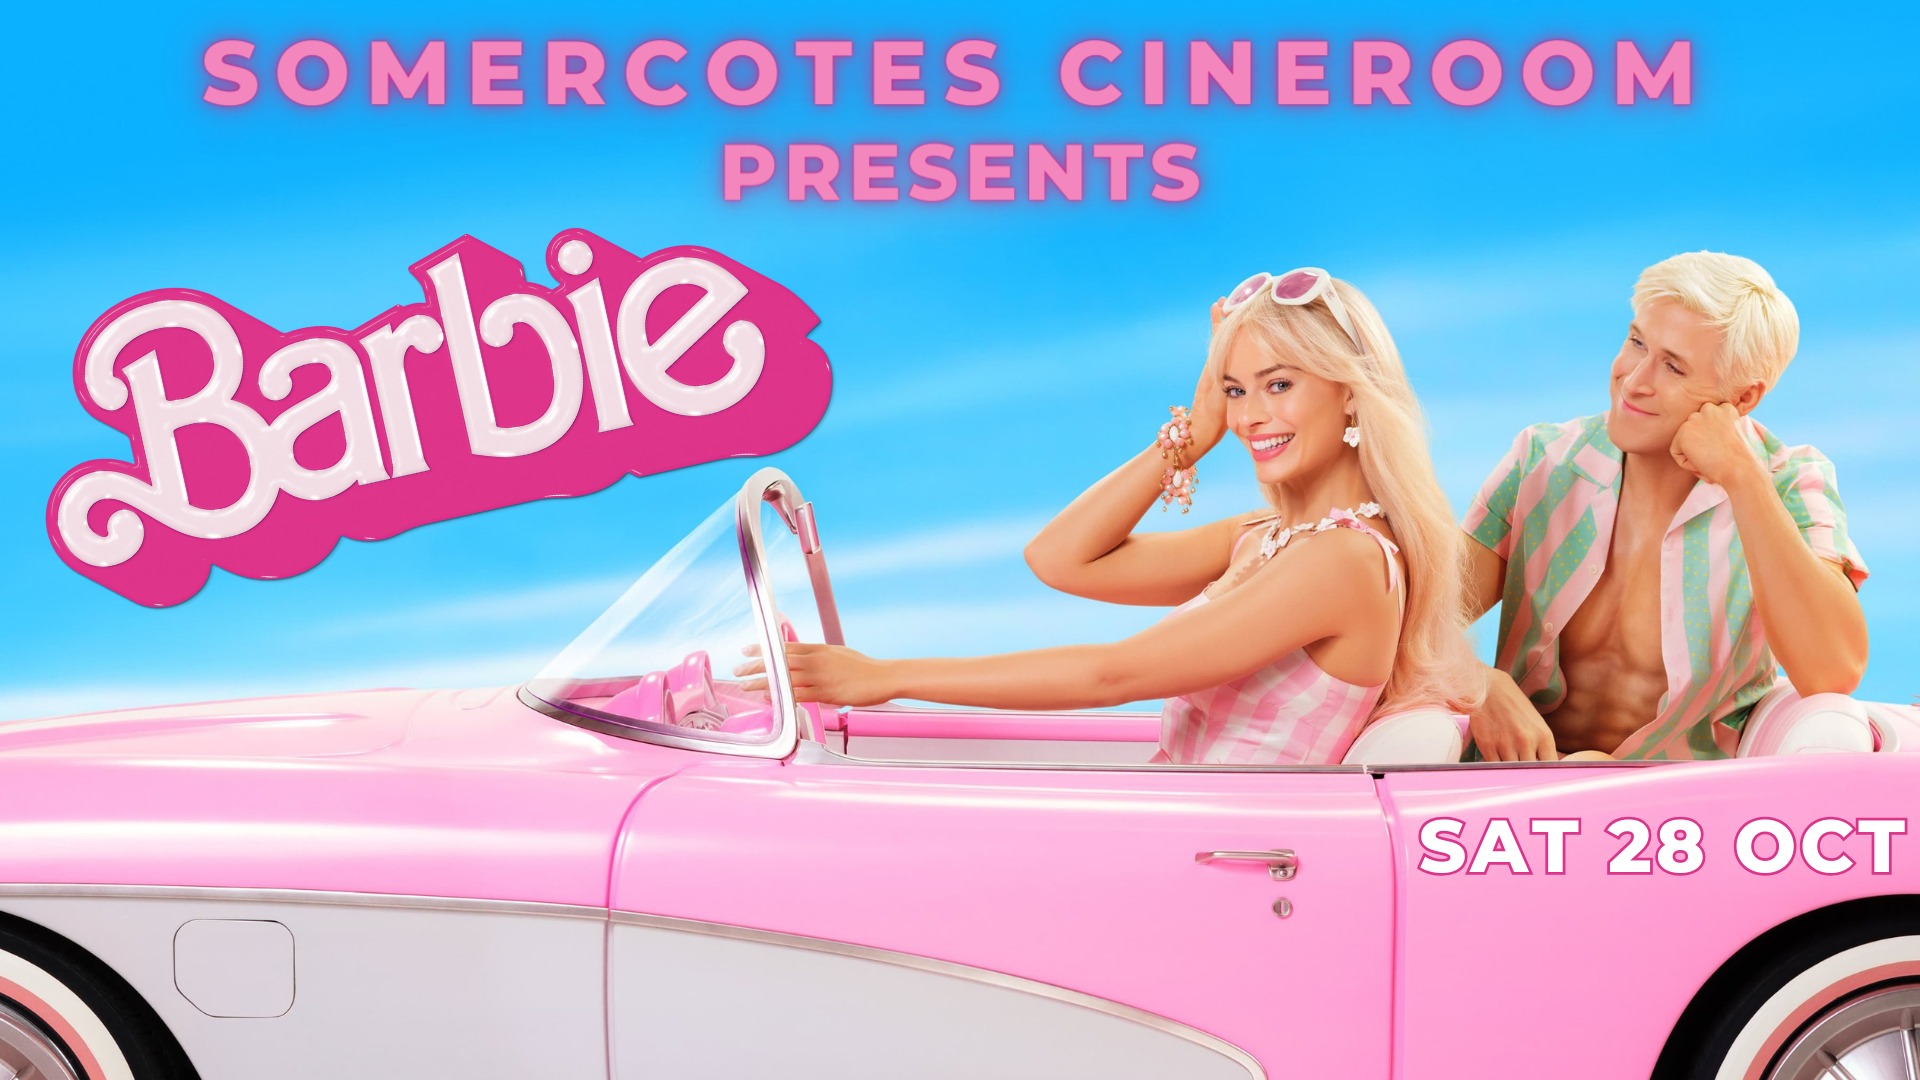 Somercotes Cineroom will return on October 28, 2023 with a screening of Barbie